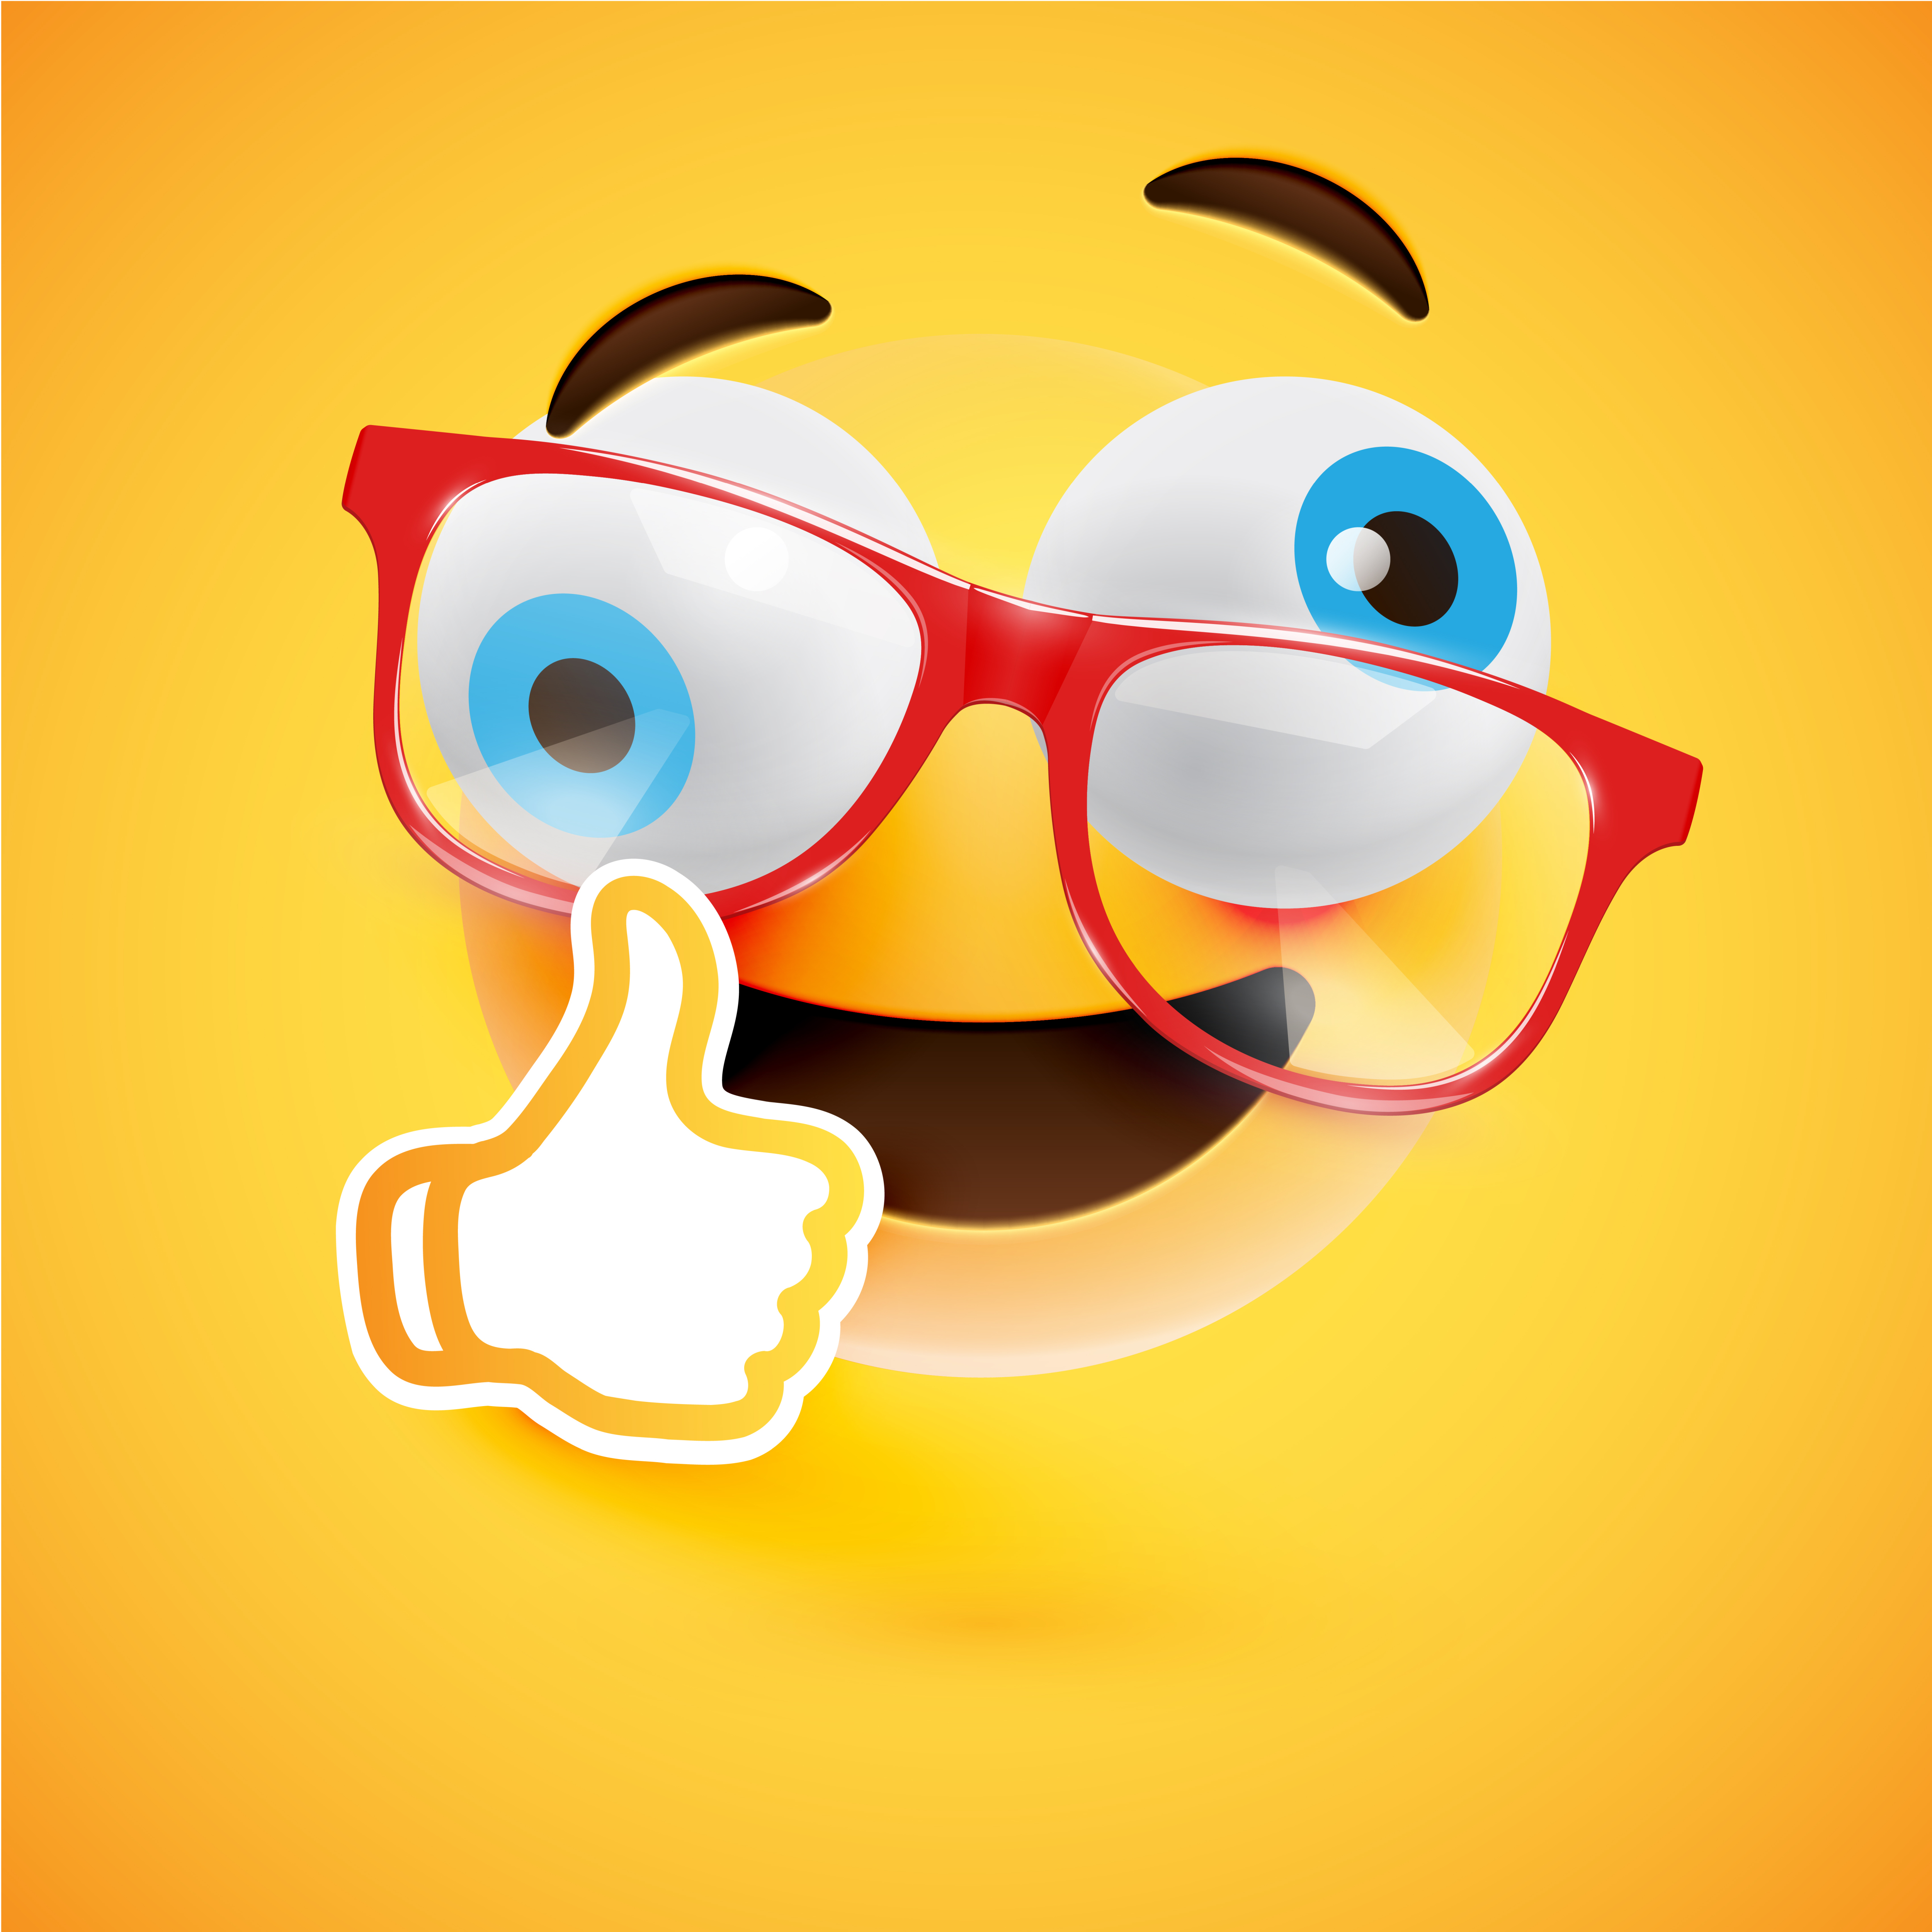  Emoticon  with thumbs  up  vector illustration 449091 Vector 